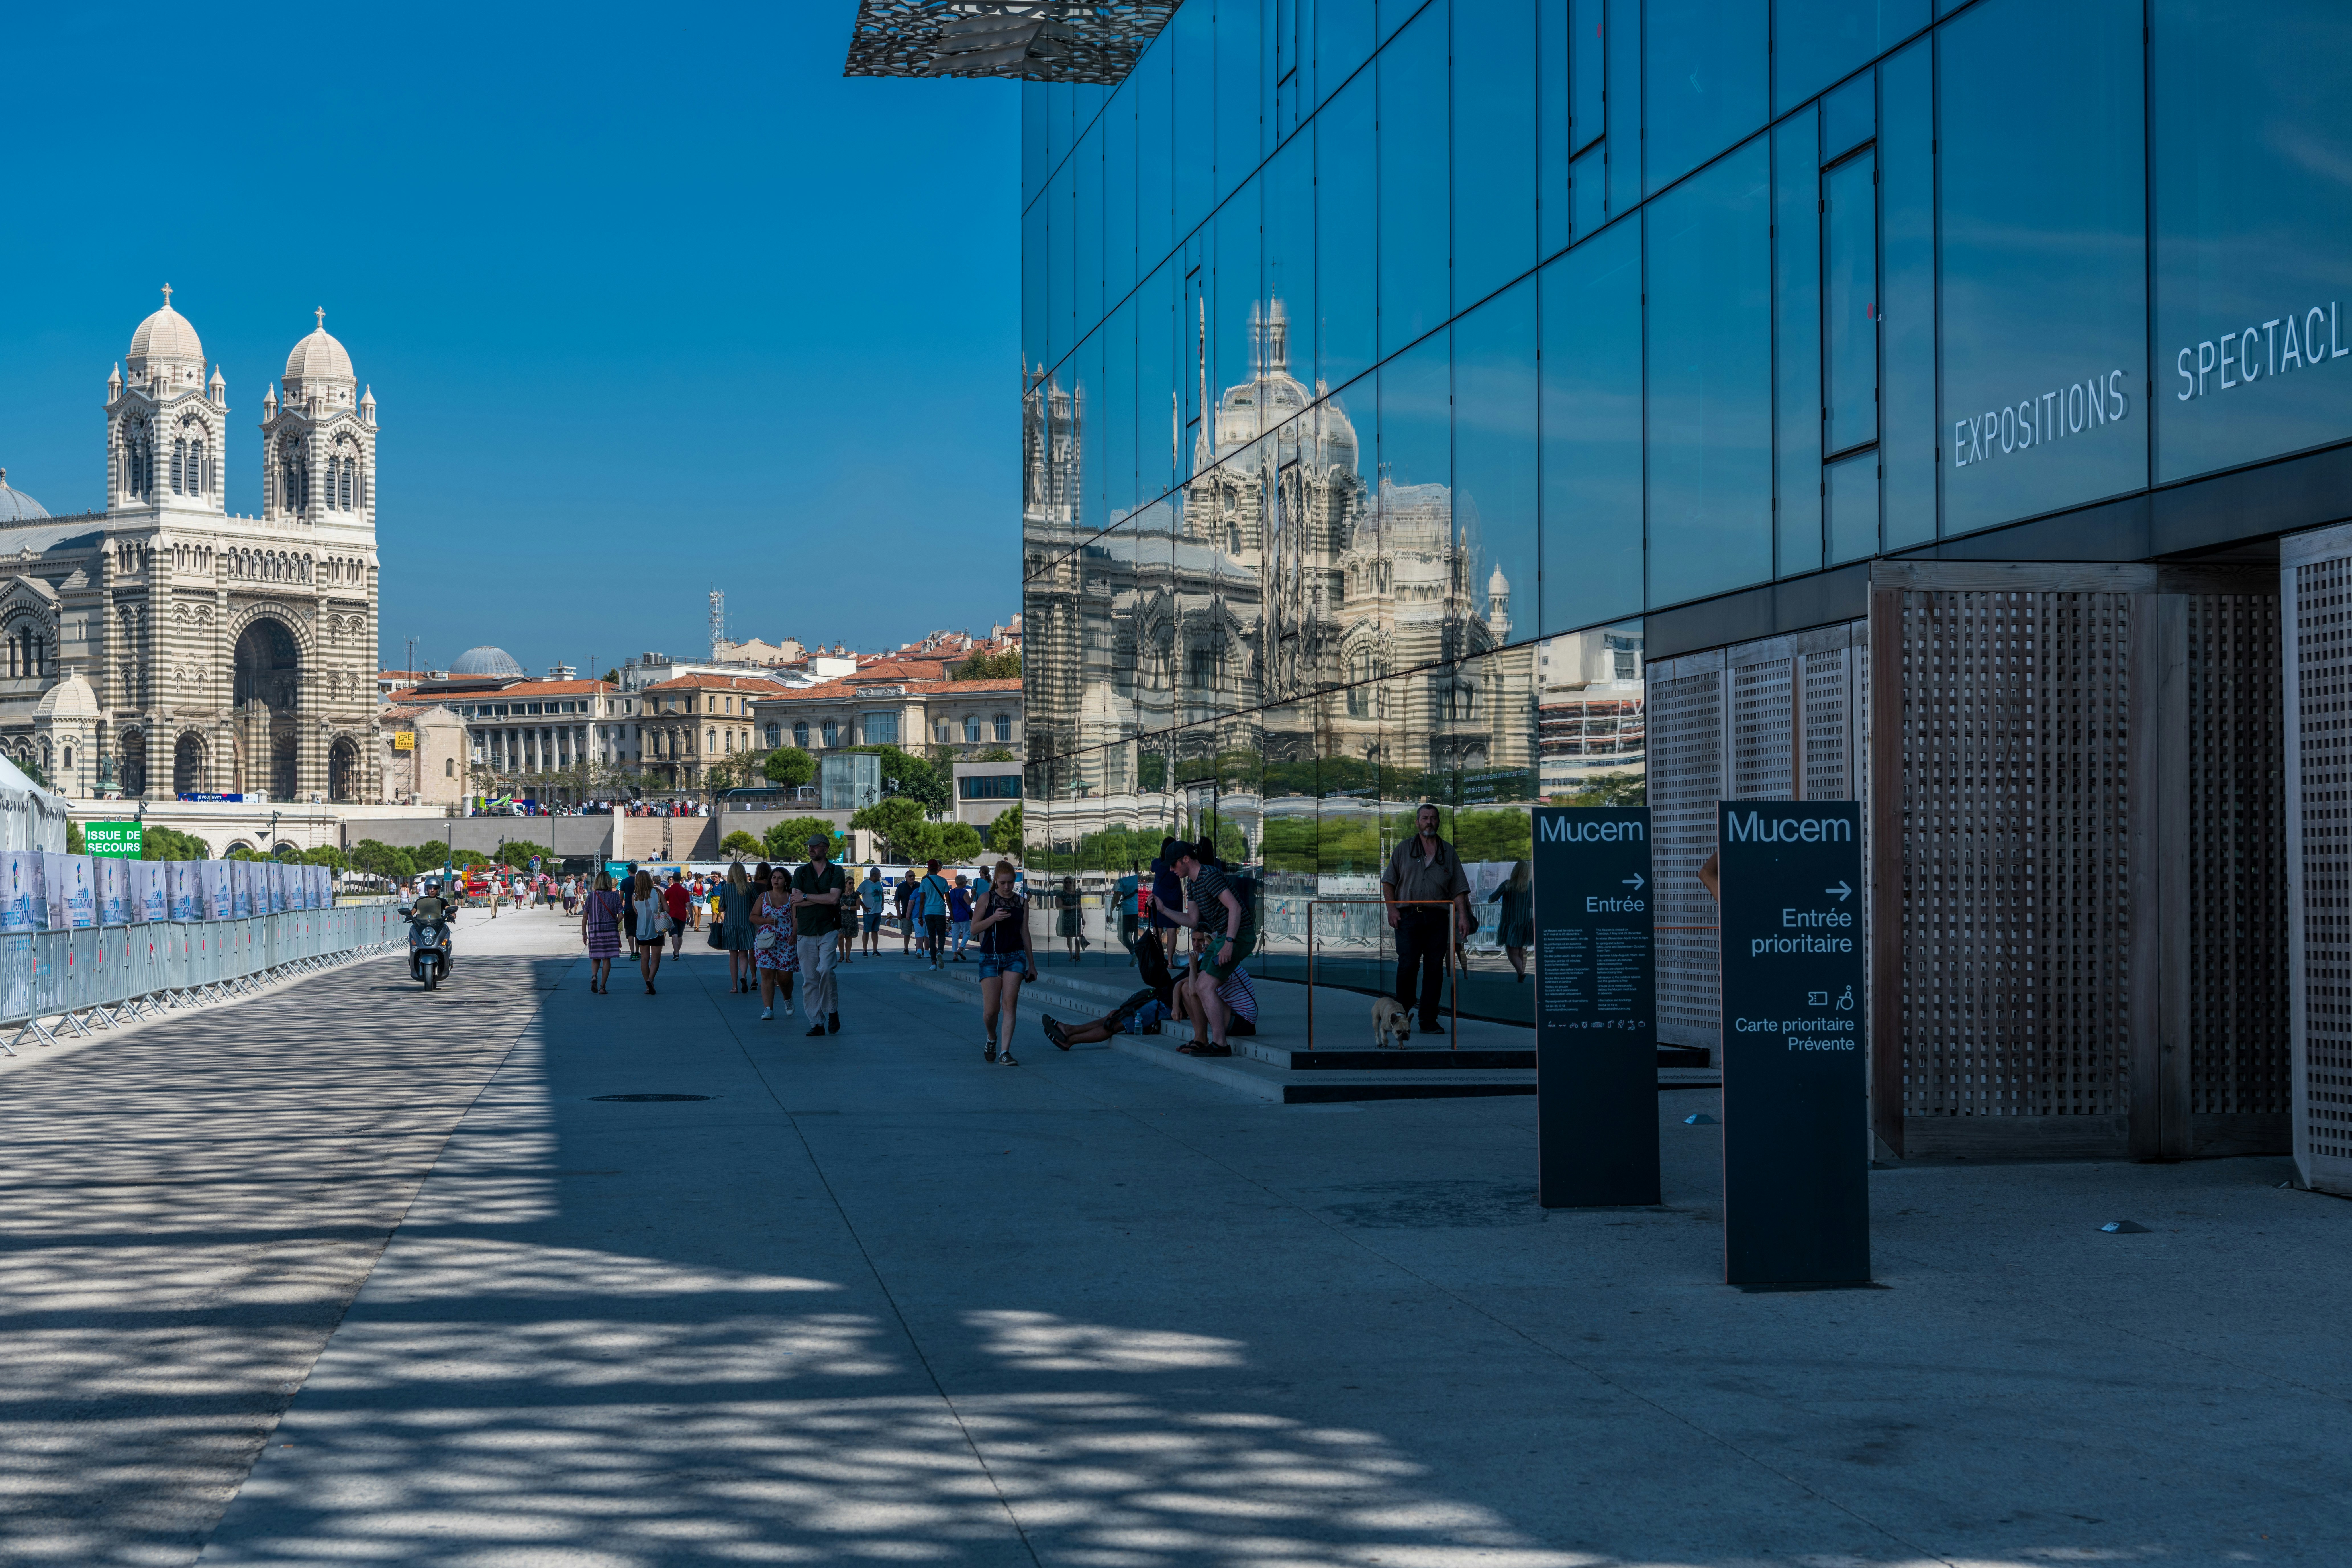 At the main entrance to the MUCEM with the reflection of Cathedral de Major in the glass